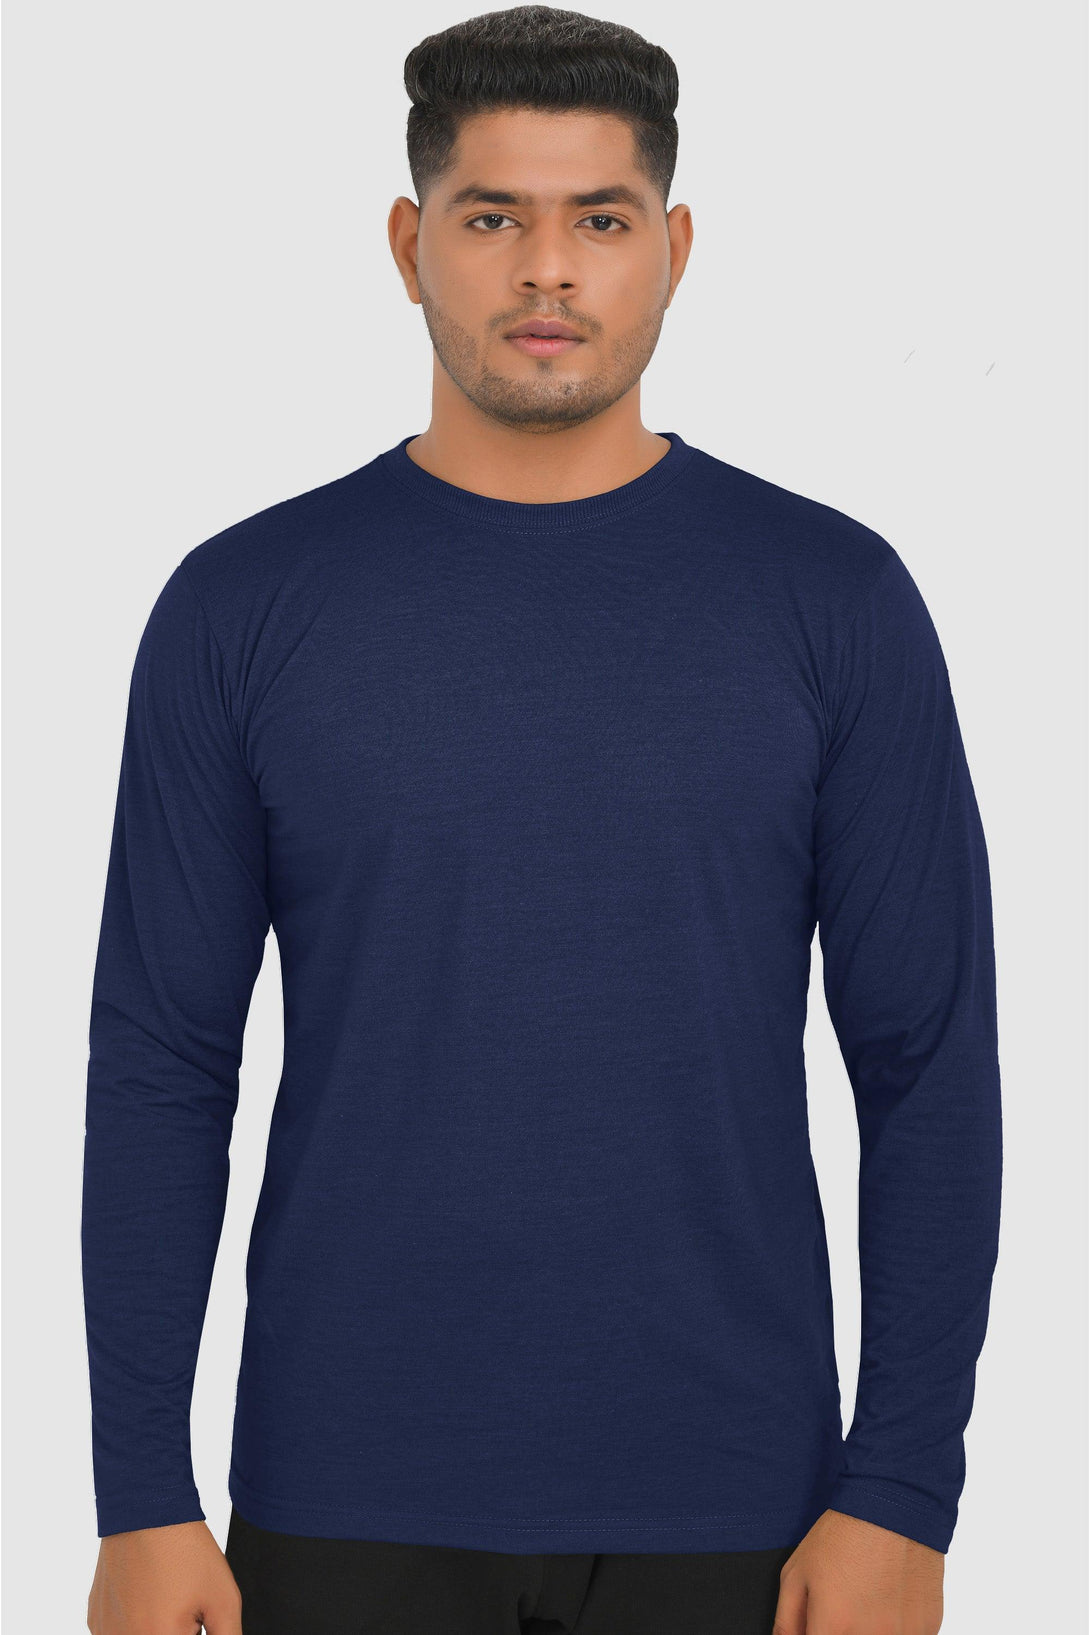 Long Sleeve Round Neck T-Shirts | NAVY - FTS